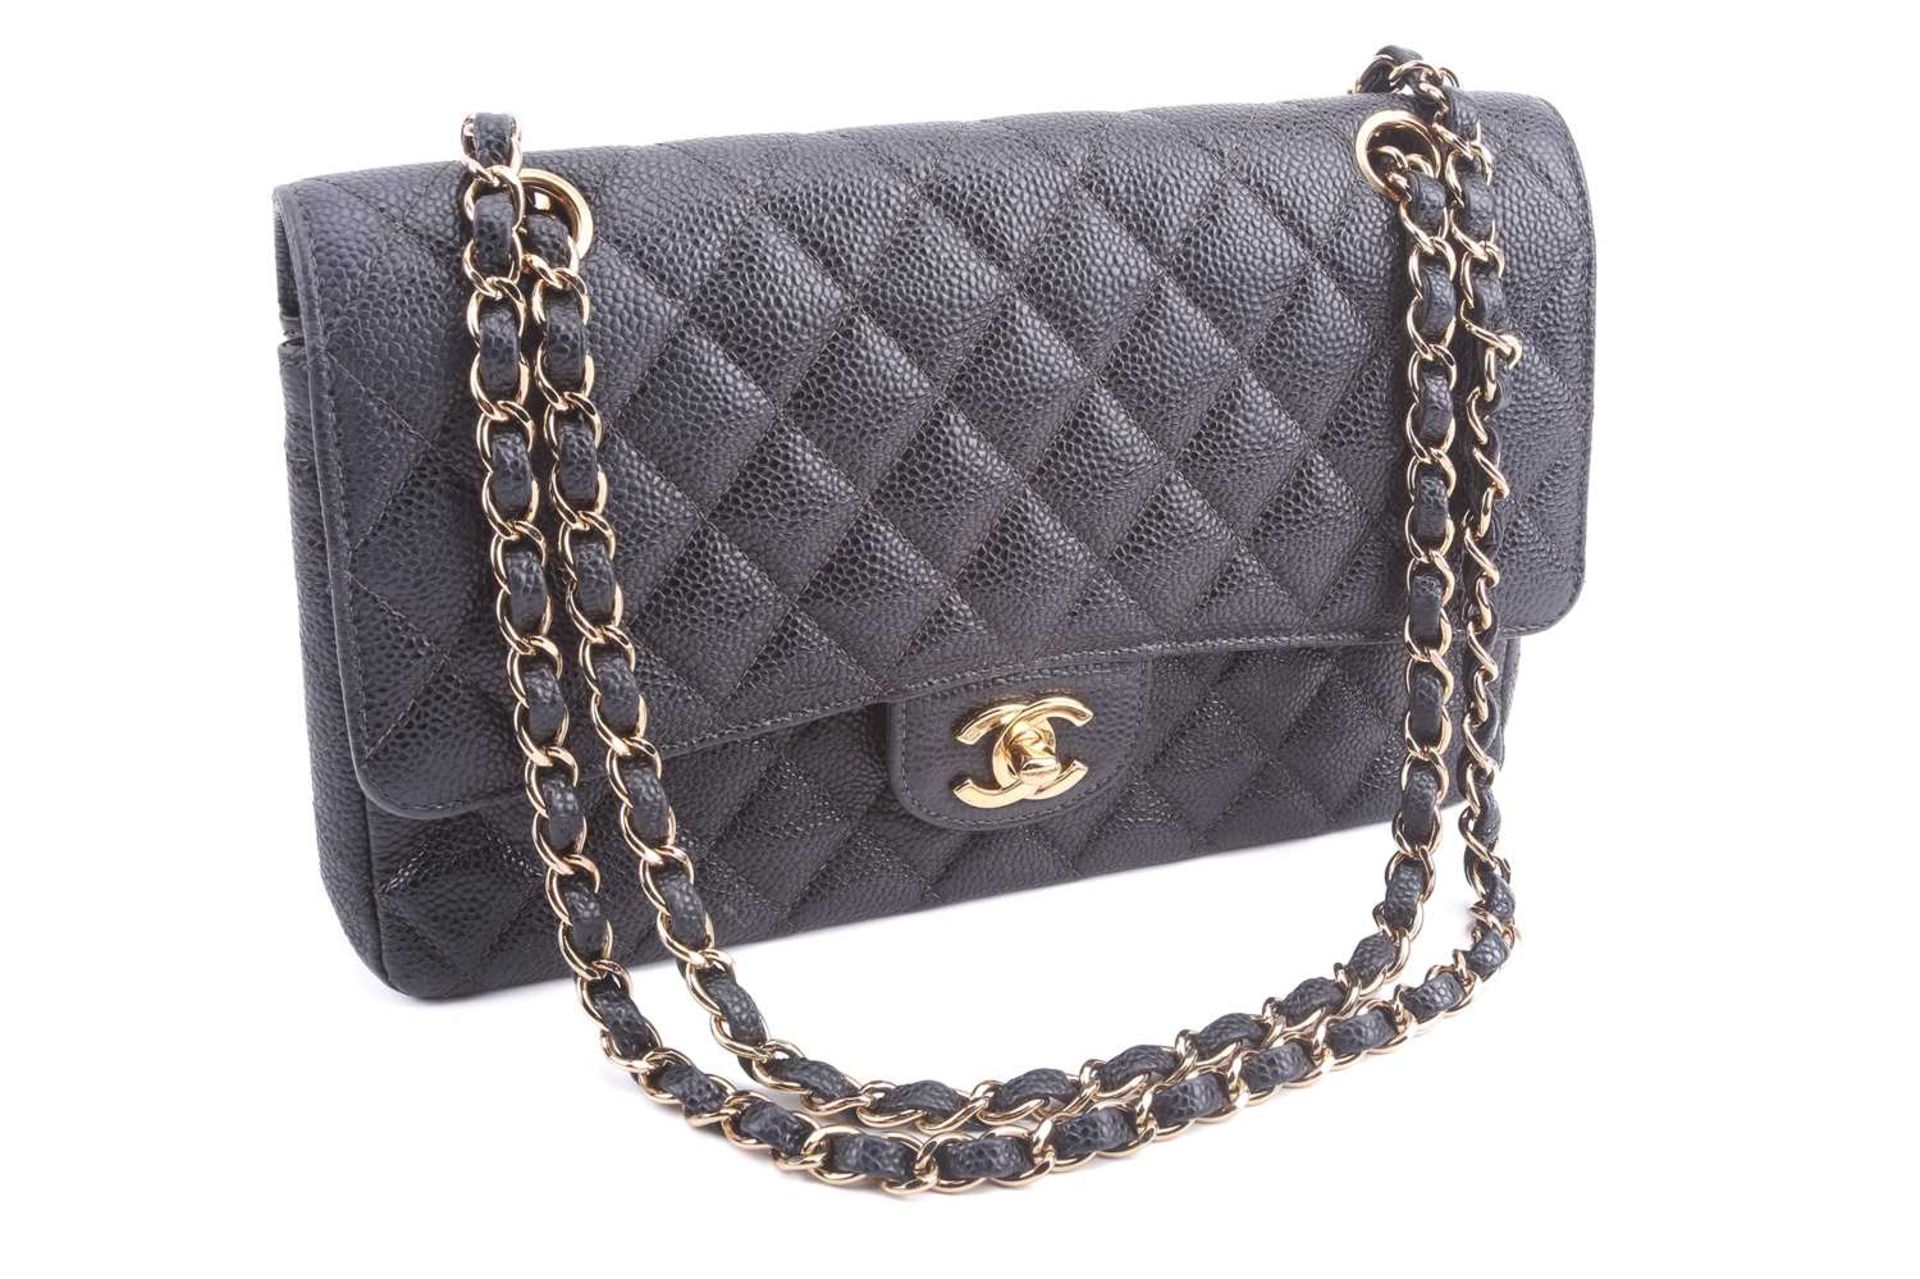 Chanel - a medium classic double flap bag in black diamond-quilted caviar leather, circa 2003,